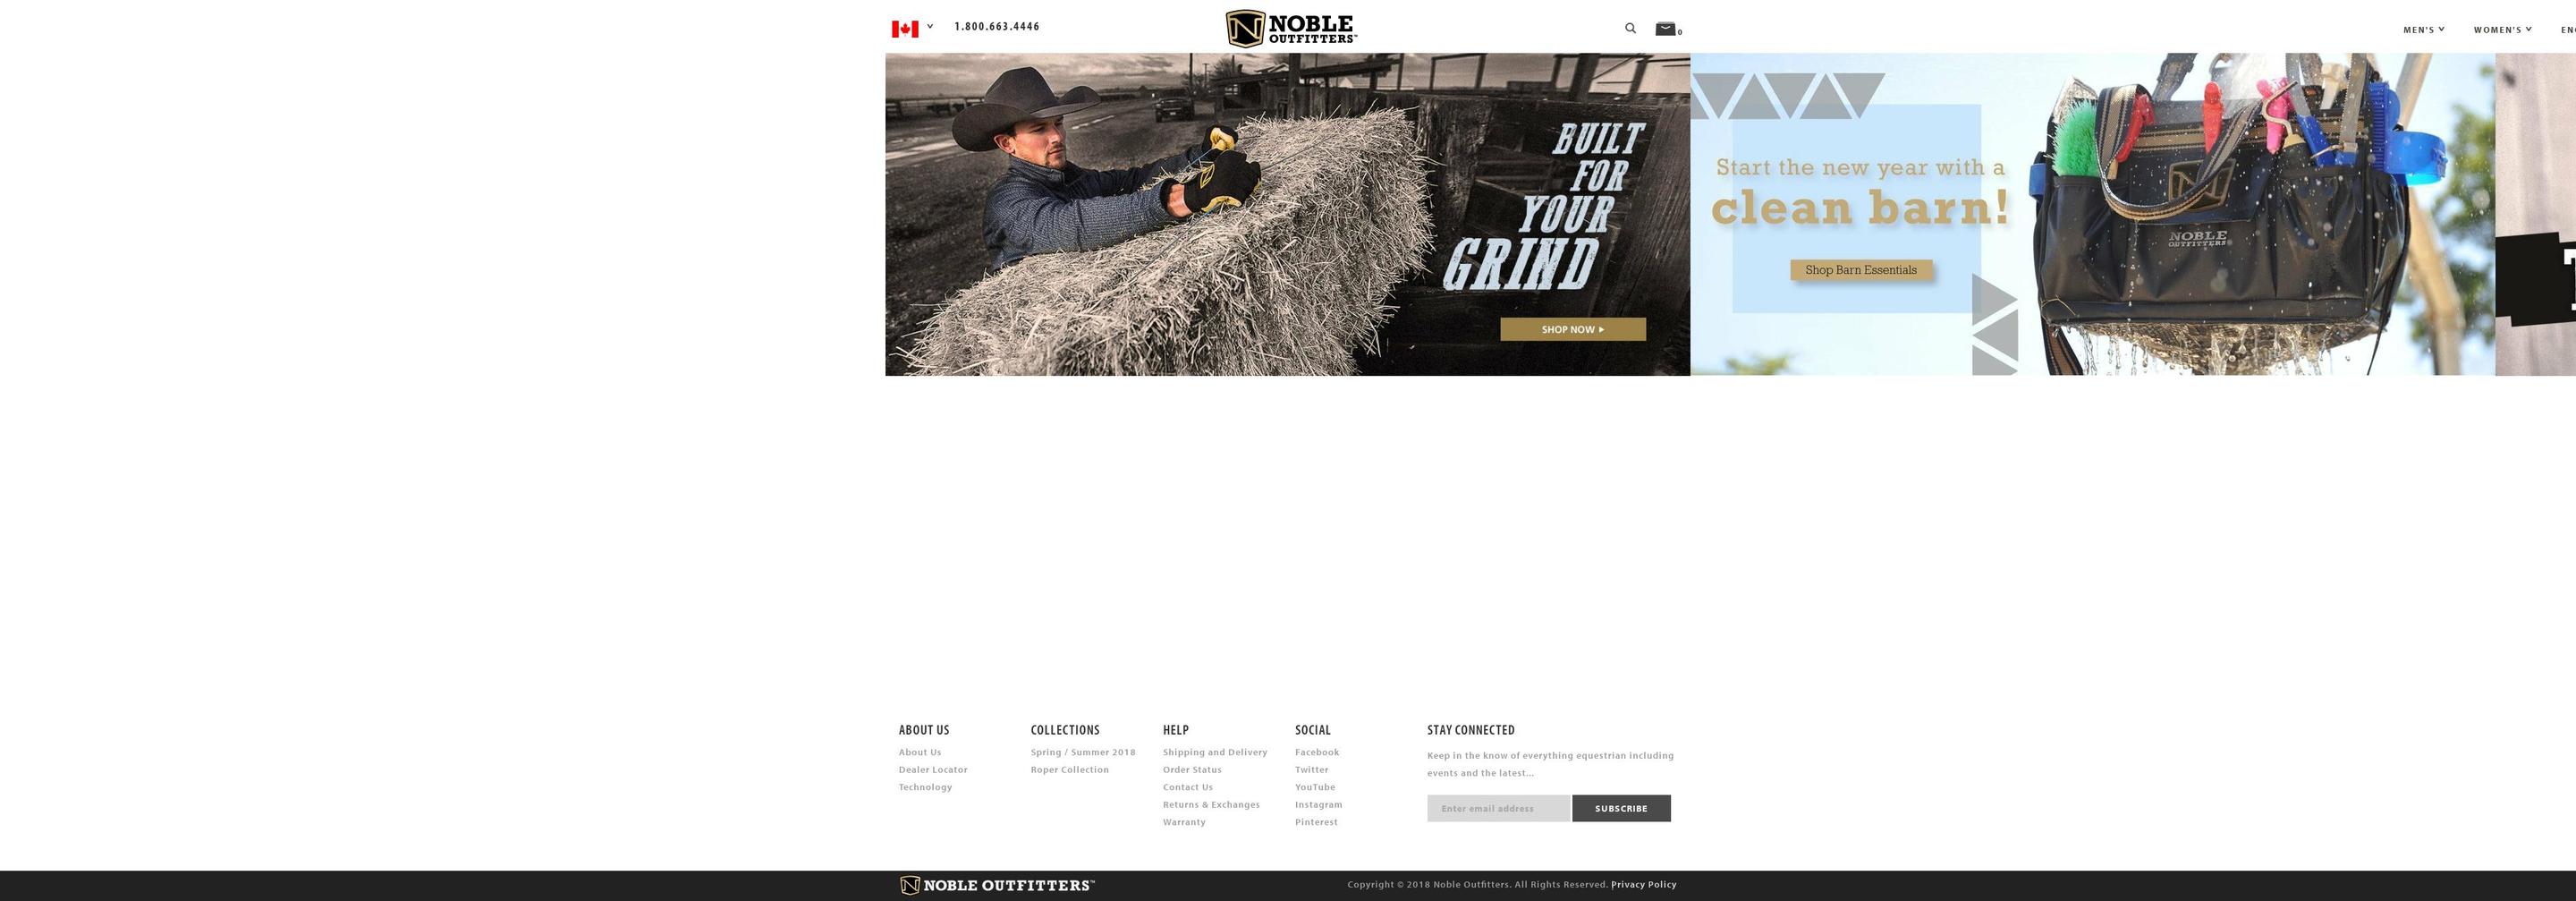 Noble 2018 Shopify theme site example nobleoutfitters.ca